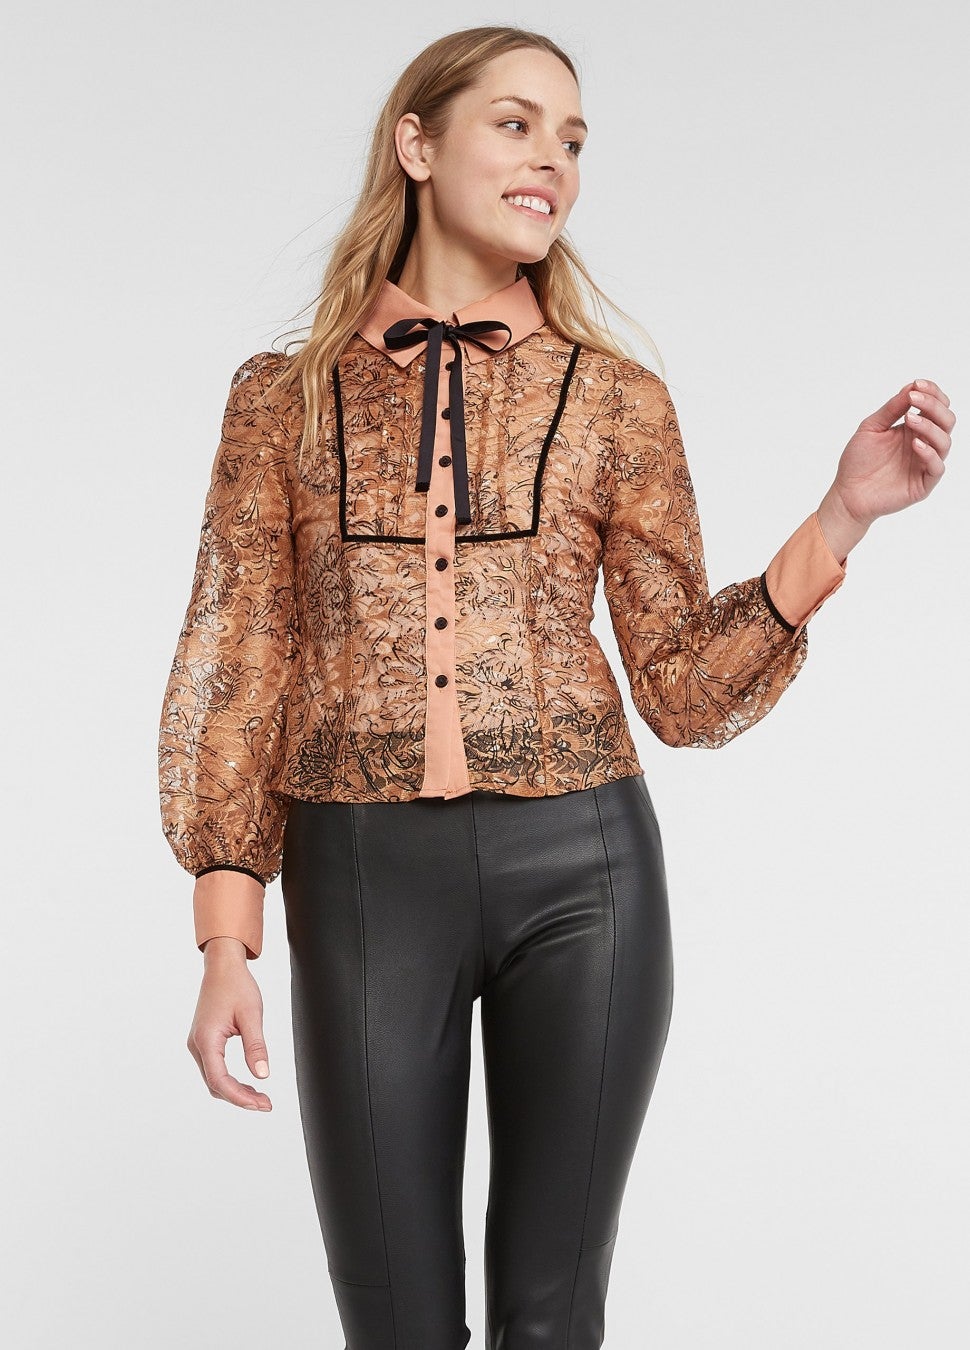 Honey Punch Tie Neck Lace Button Up Top